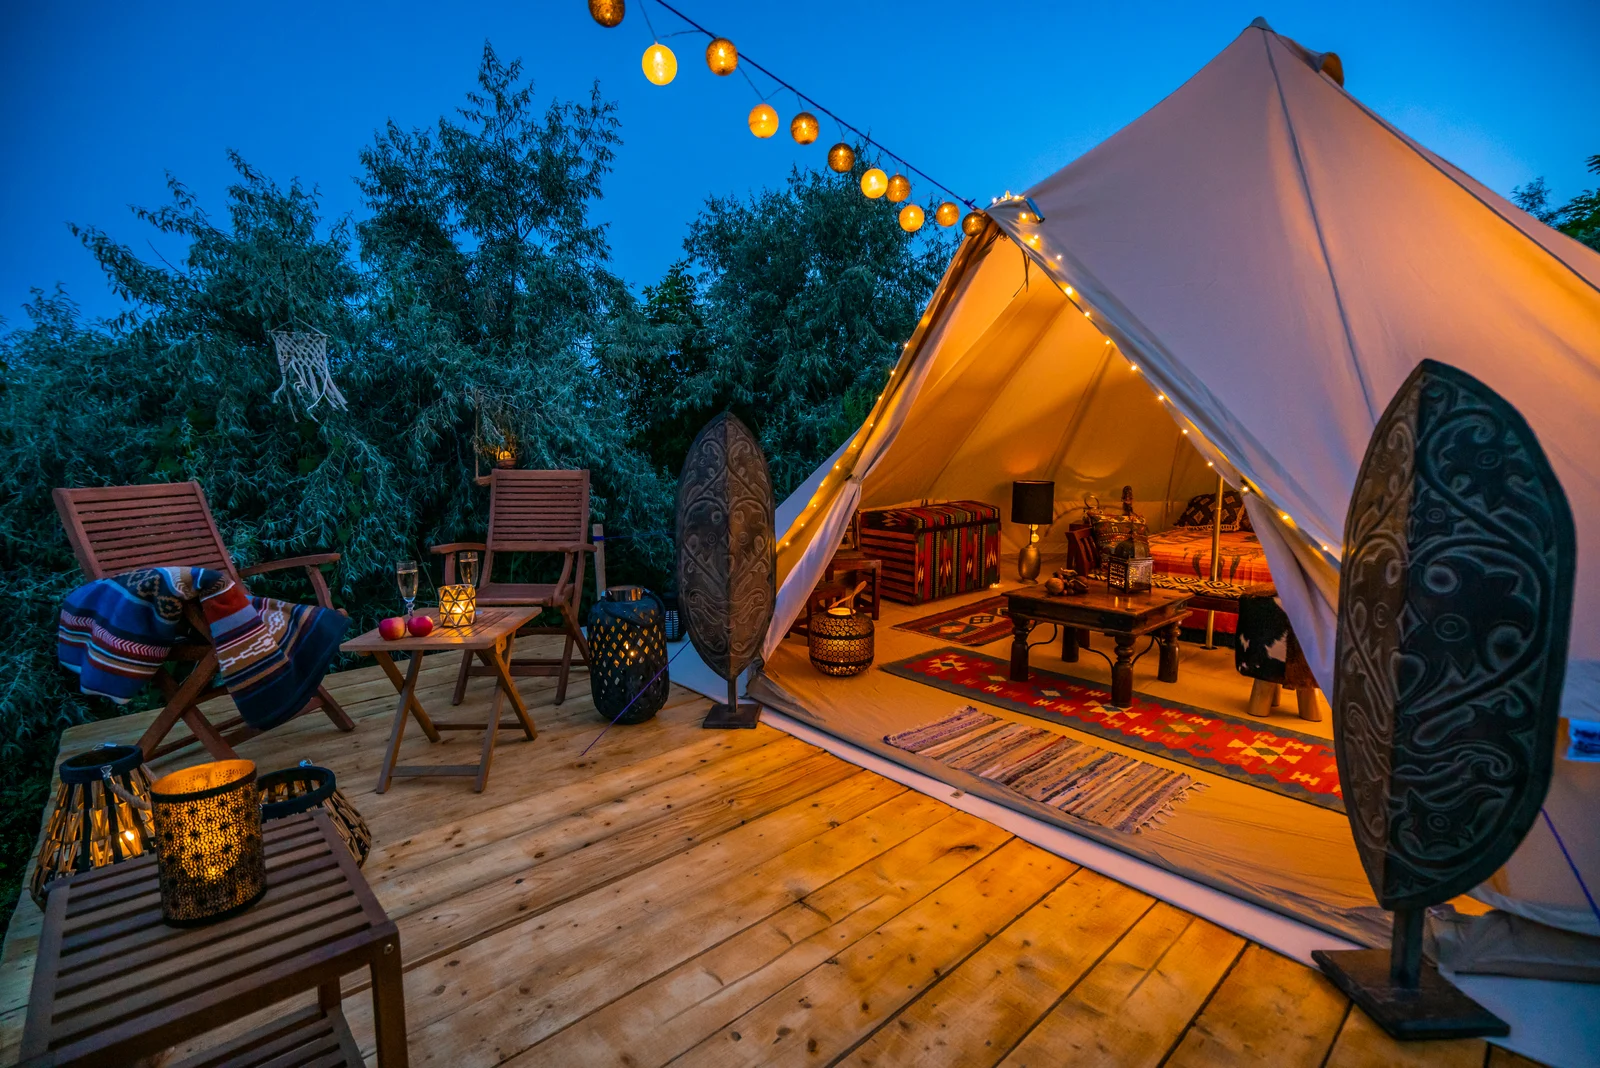 evening view with indian glamping tent